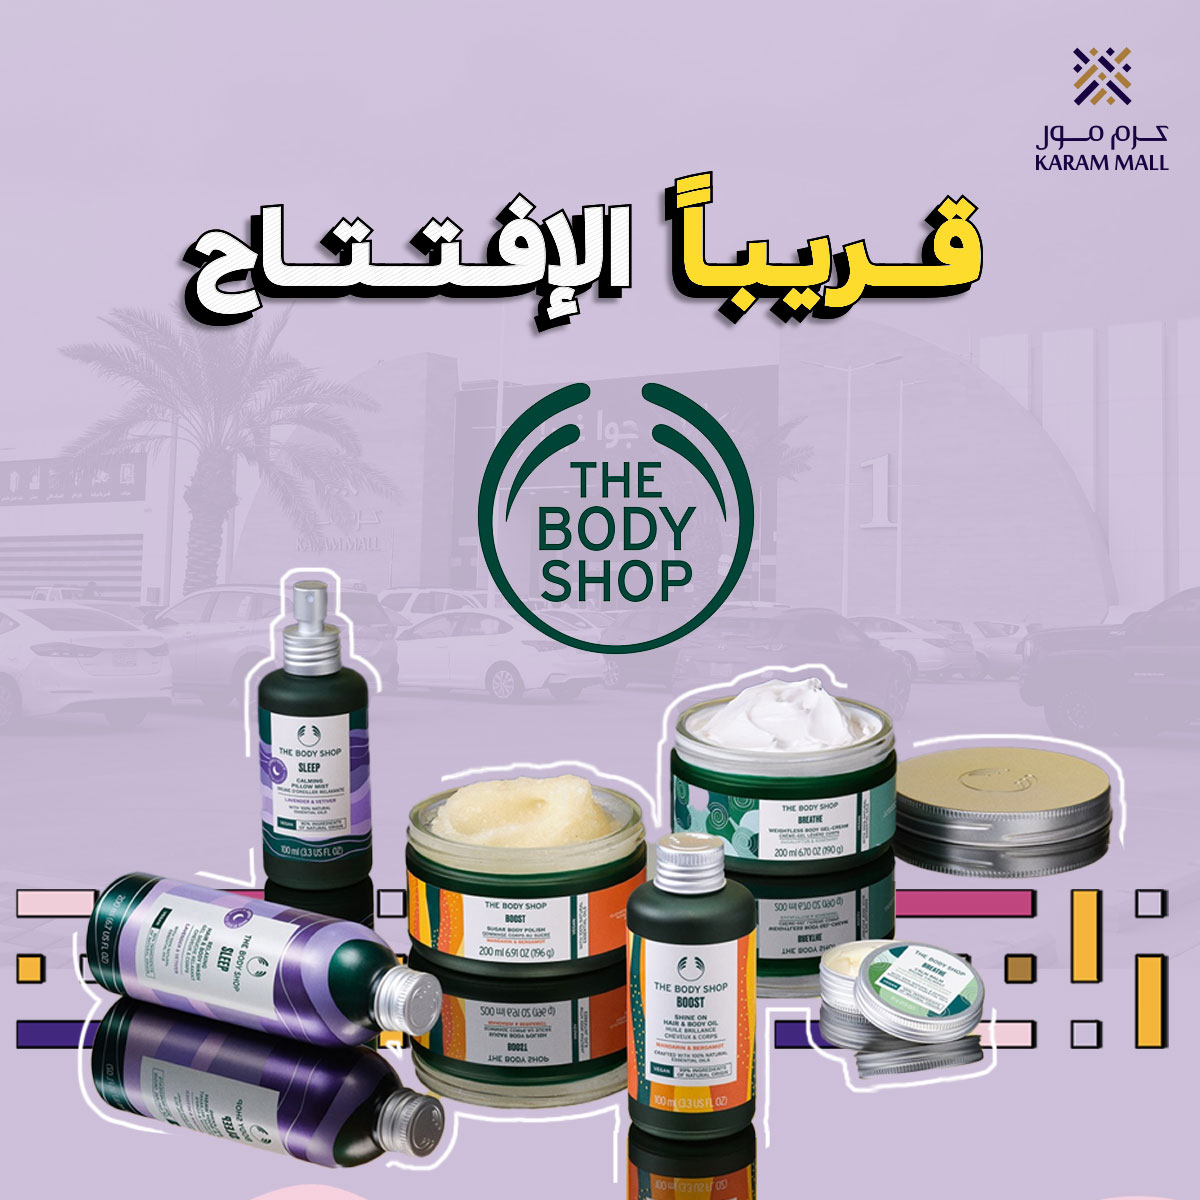 The Body Shop Opening Soon